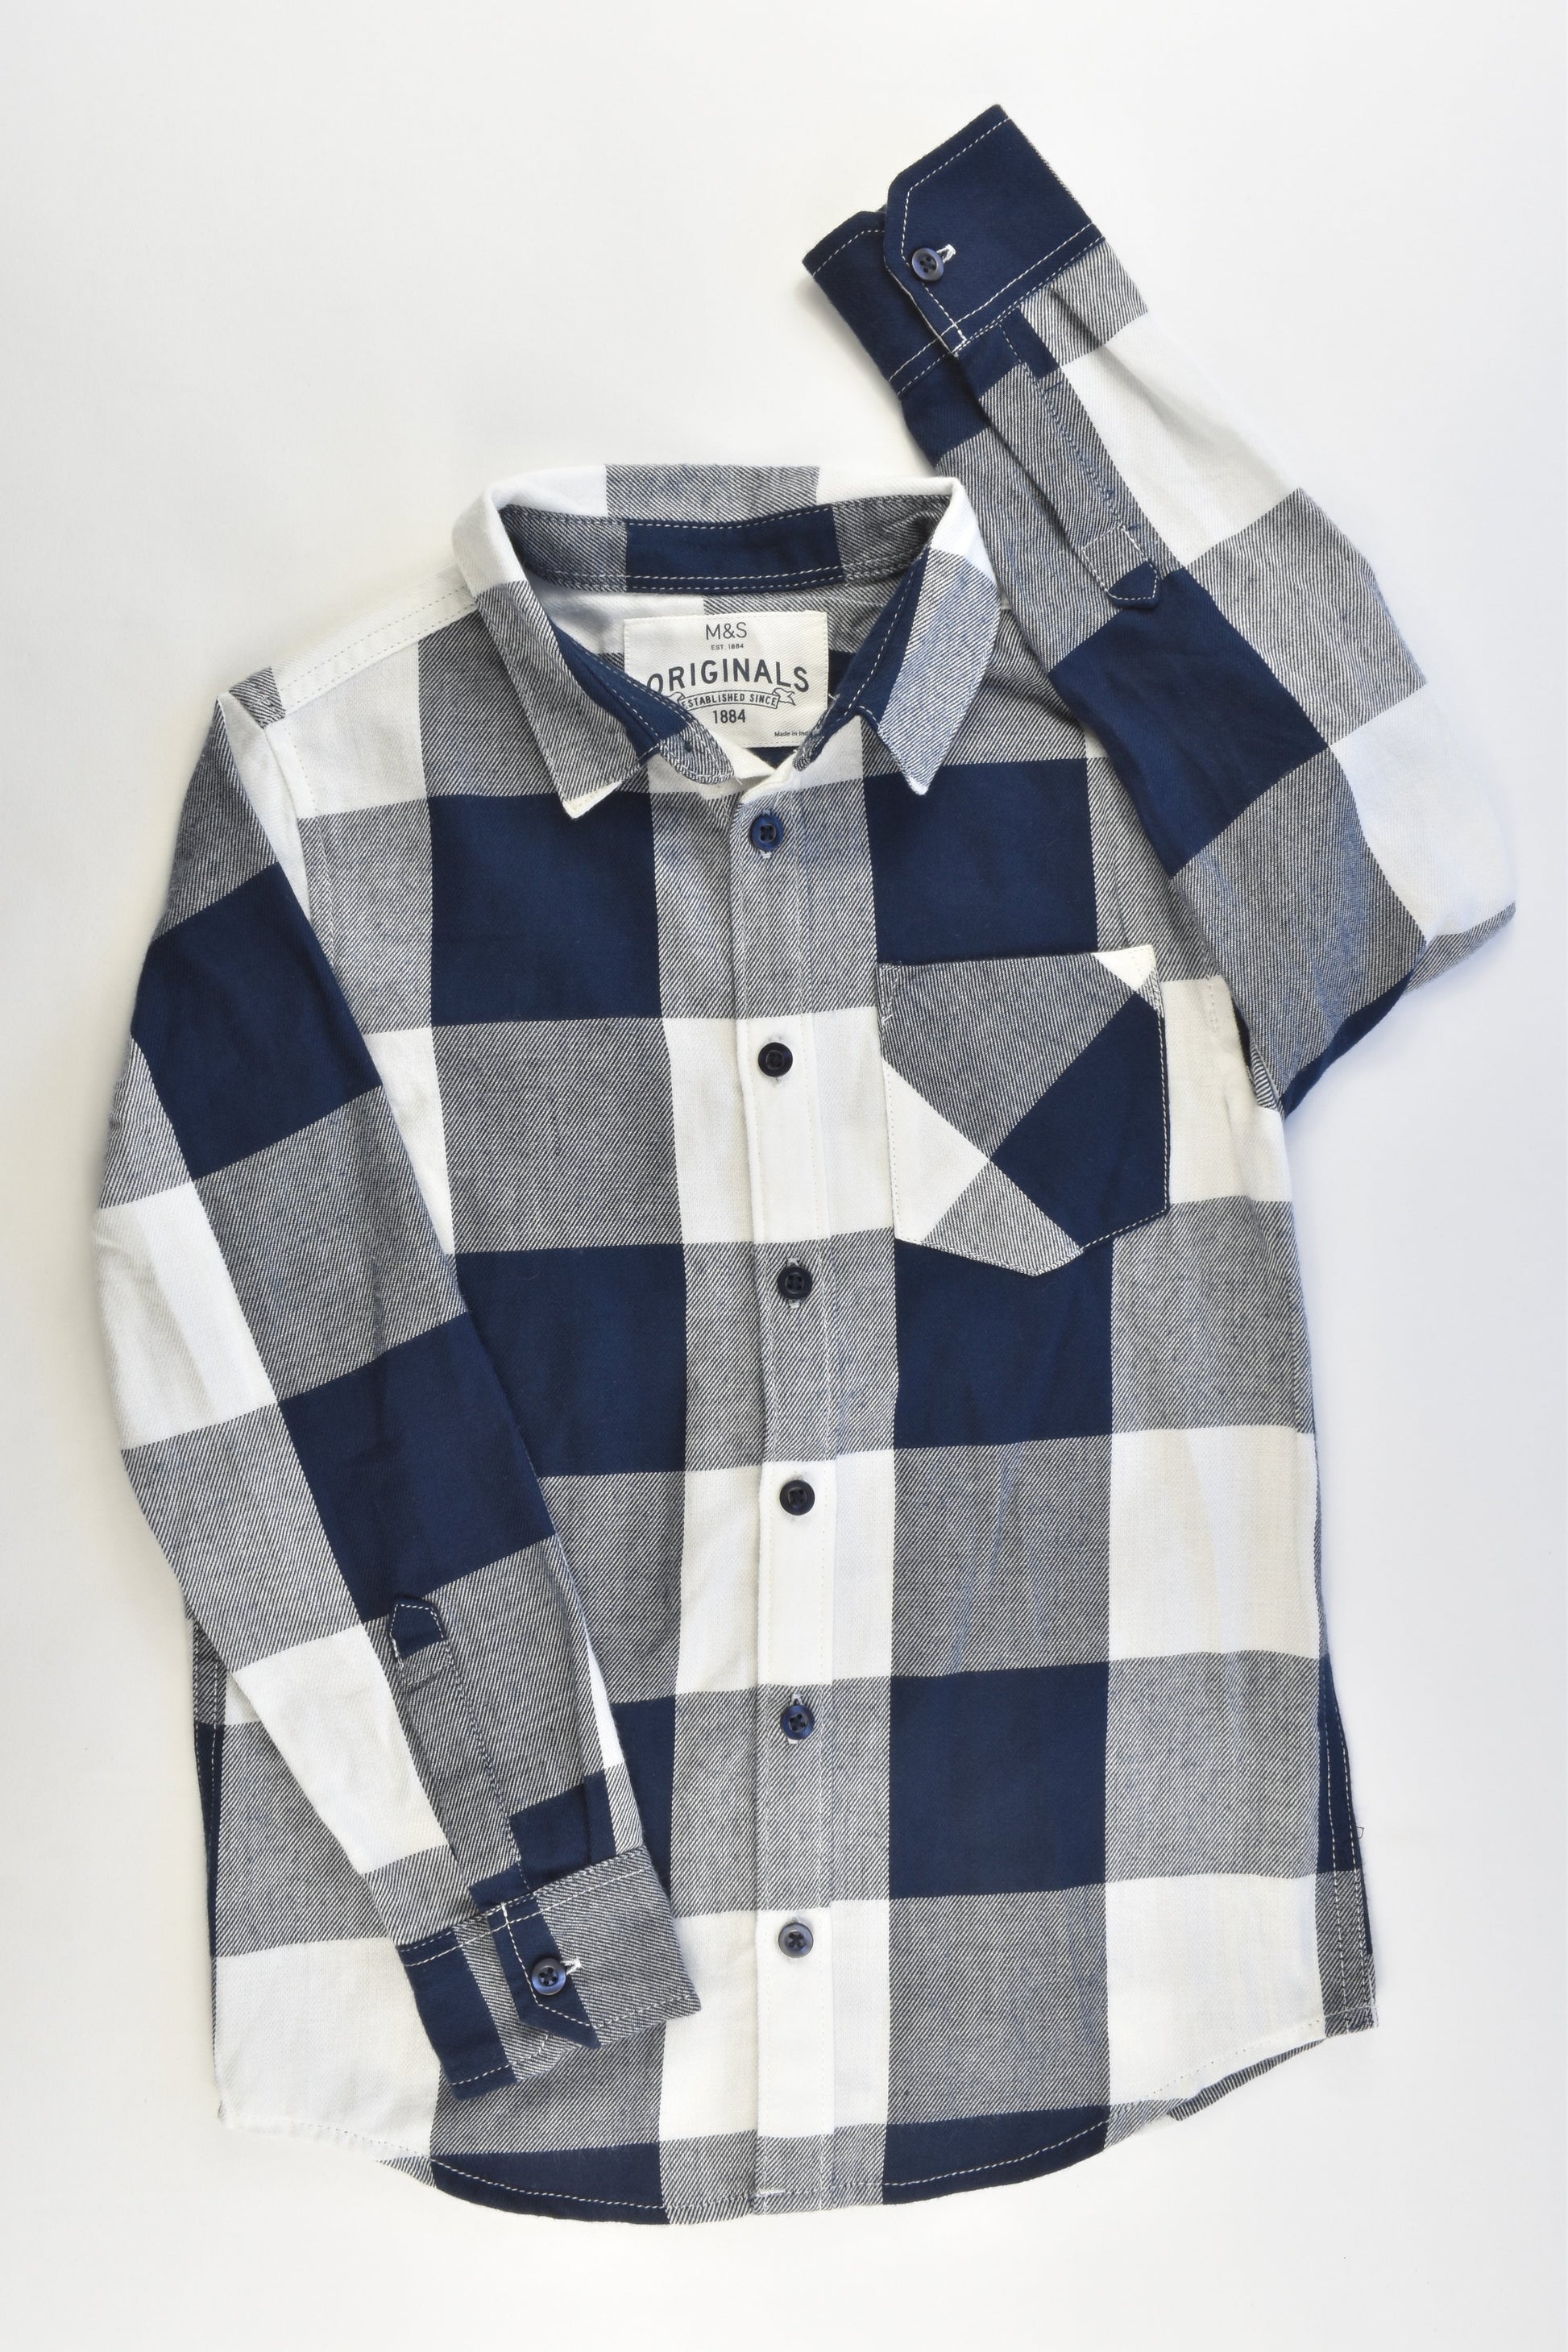 NEW M&S Size 7-8 Collared Shirt